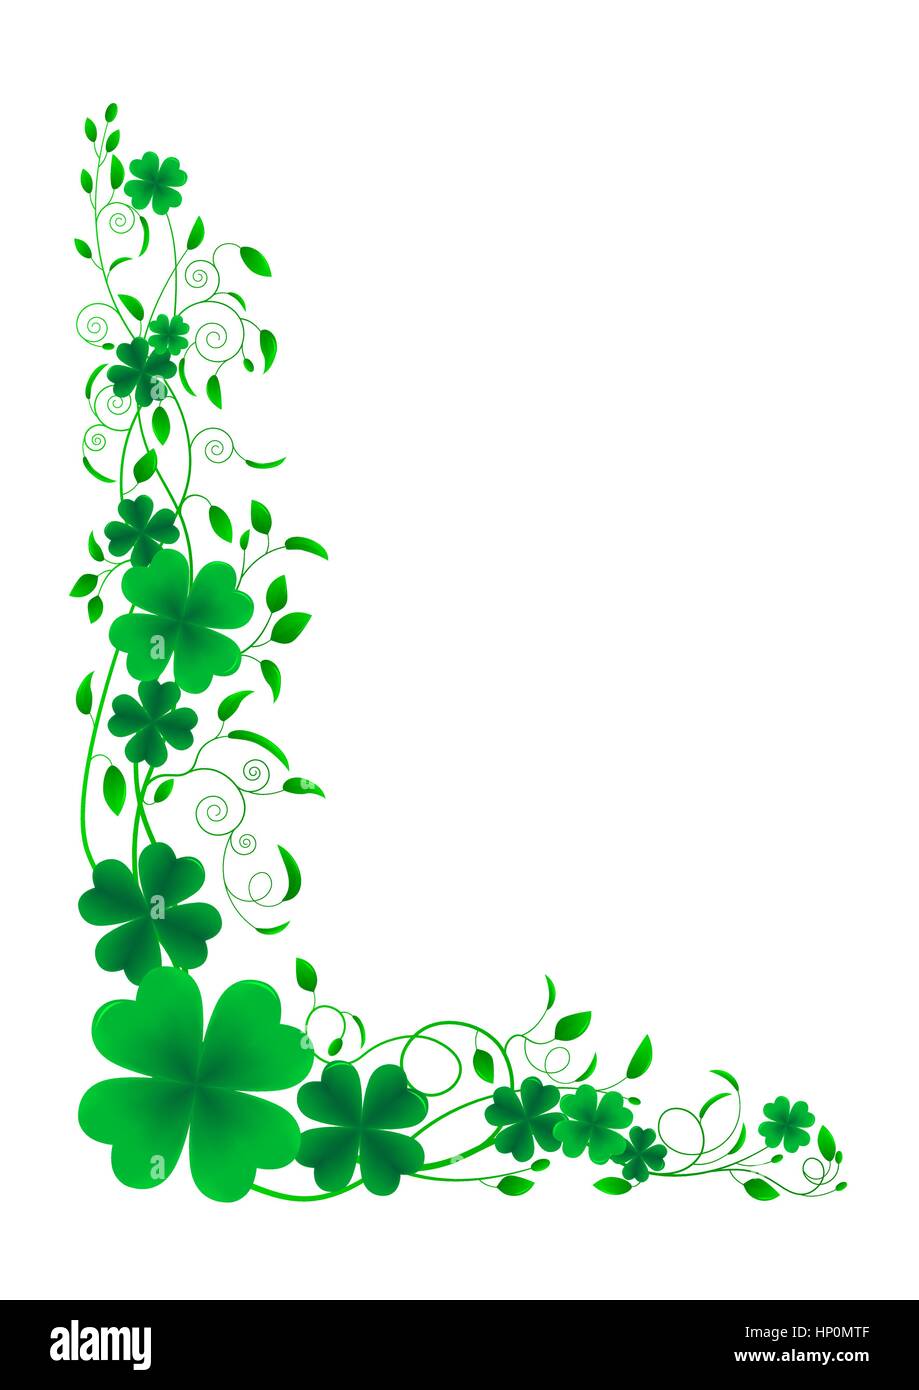 Clover floral ornament Stock Vector